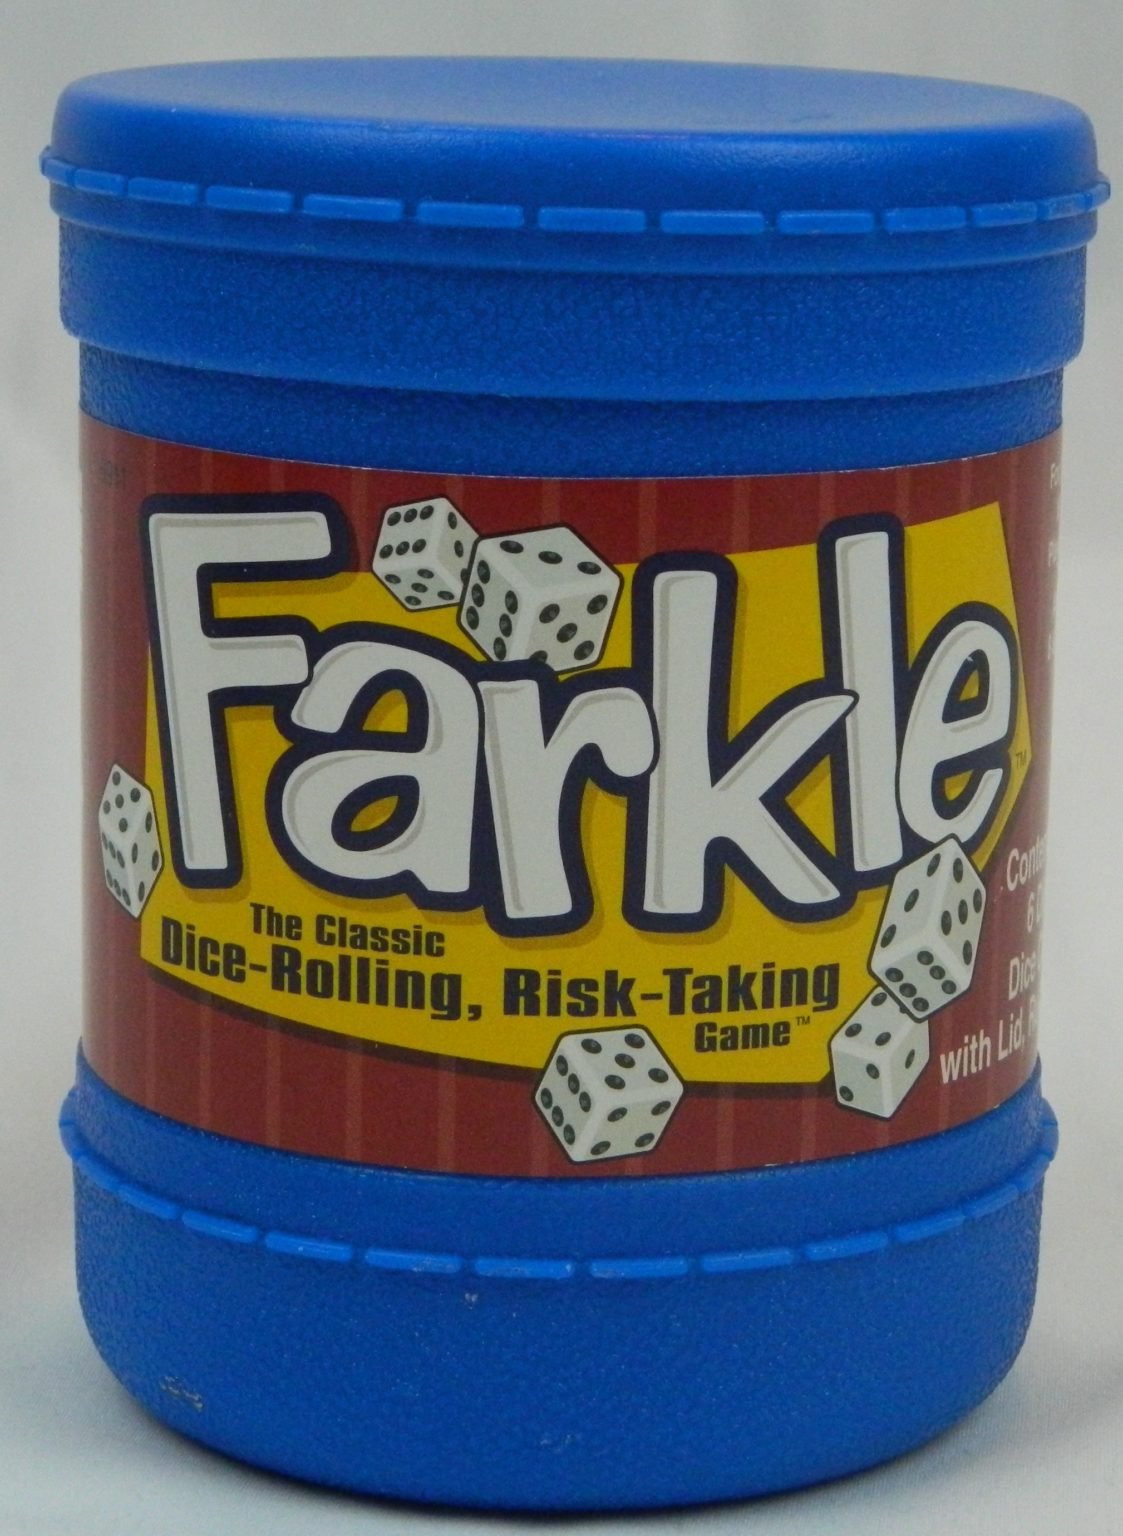 rules for farkle dice game